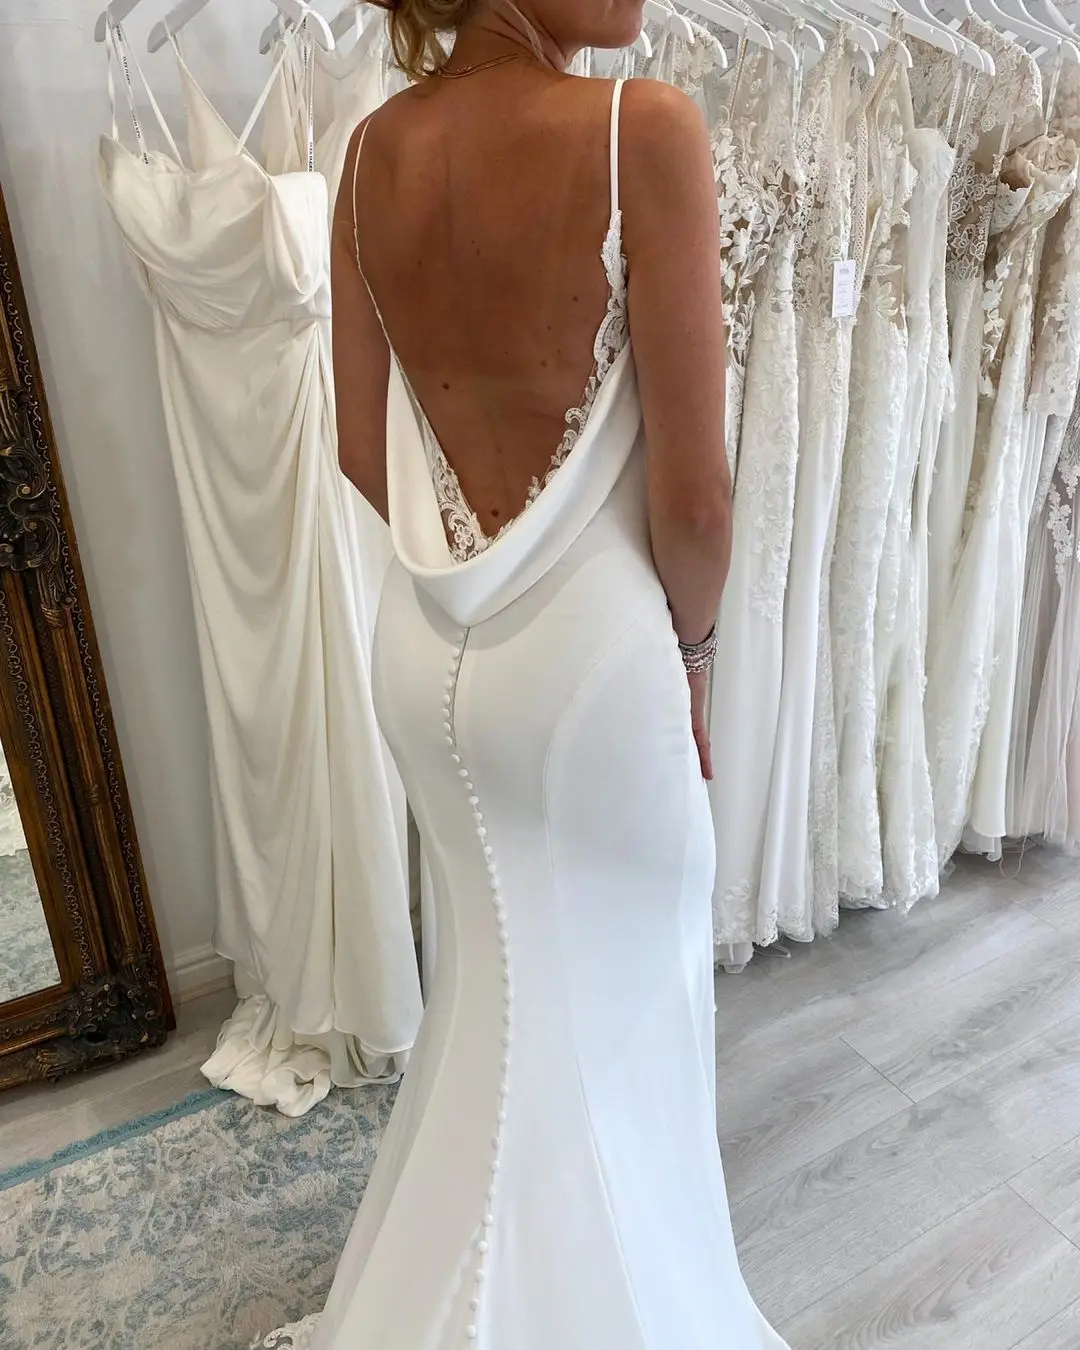 https://ae01.alicdn.com/kf/S1493a48a89b34176ba3bf4cba082809bz/FATAPARESE-Wedding-Dress-Full-length-Crepe-Gown-Spaghetti-Straps-Mermaid-Gown-Illusion-Low-Cowl-Back-and.jpg